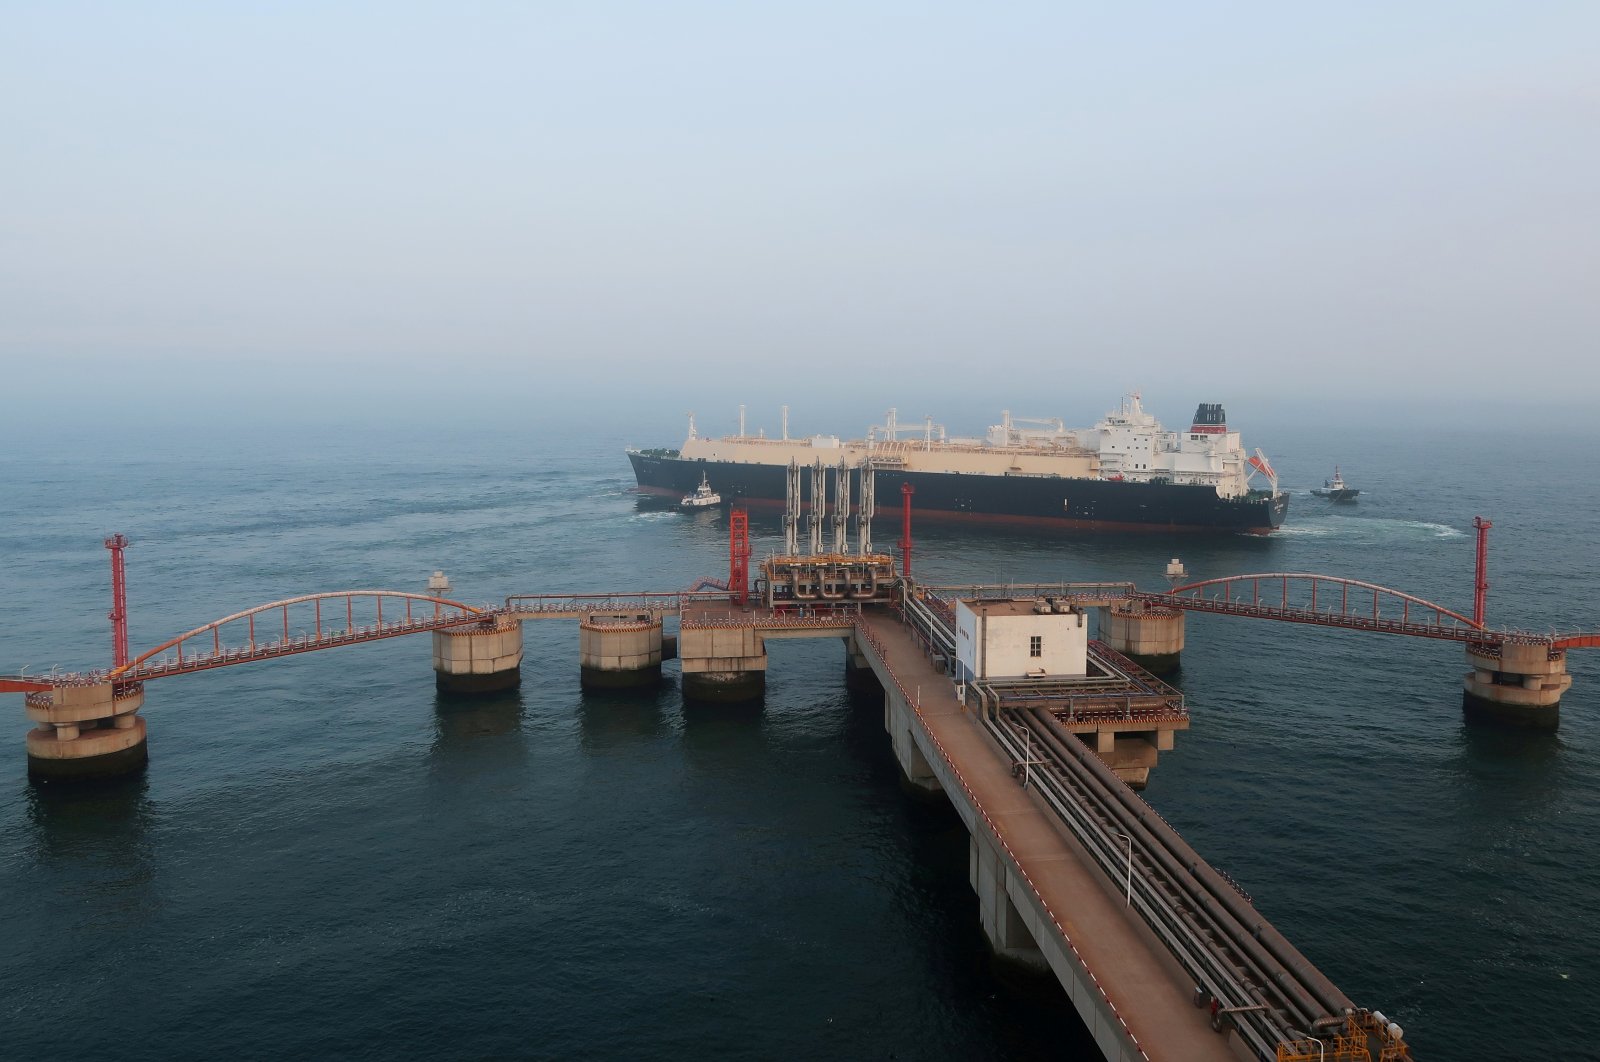 A liquified natural gas (LNG) tanker leaves the dock after discharge at PetroChina's receiving terminal in Dalian, Liaoning province, China, July 16, 2018.  (Reuters Photo)